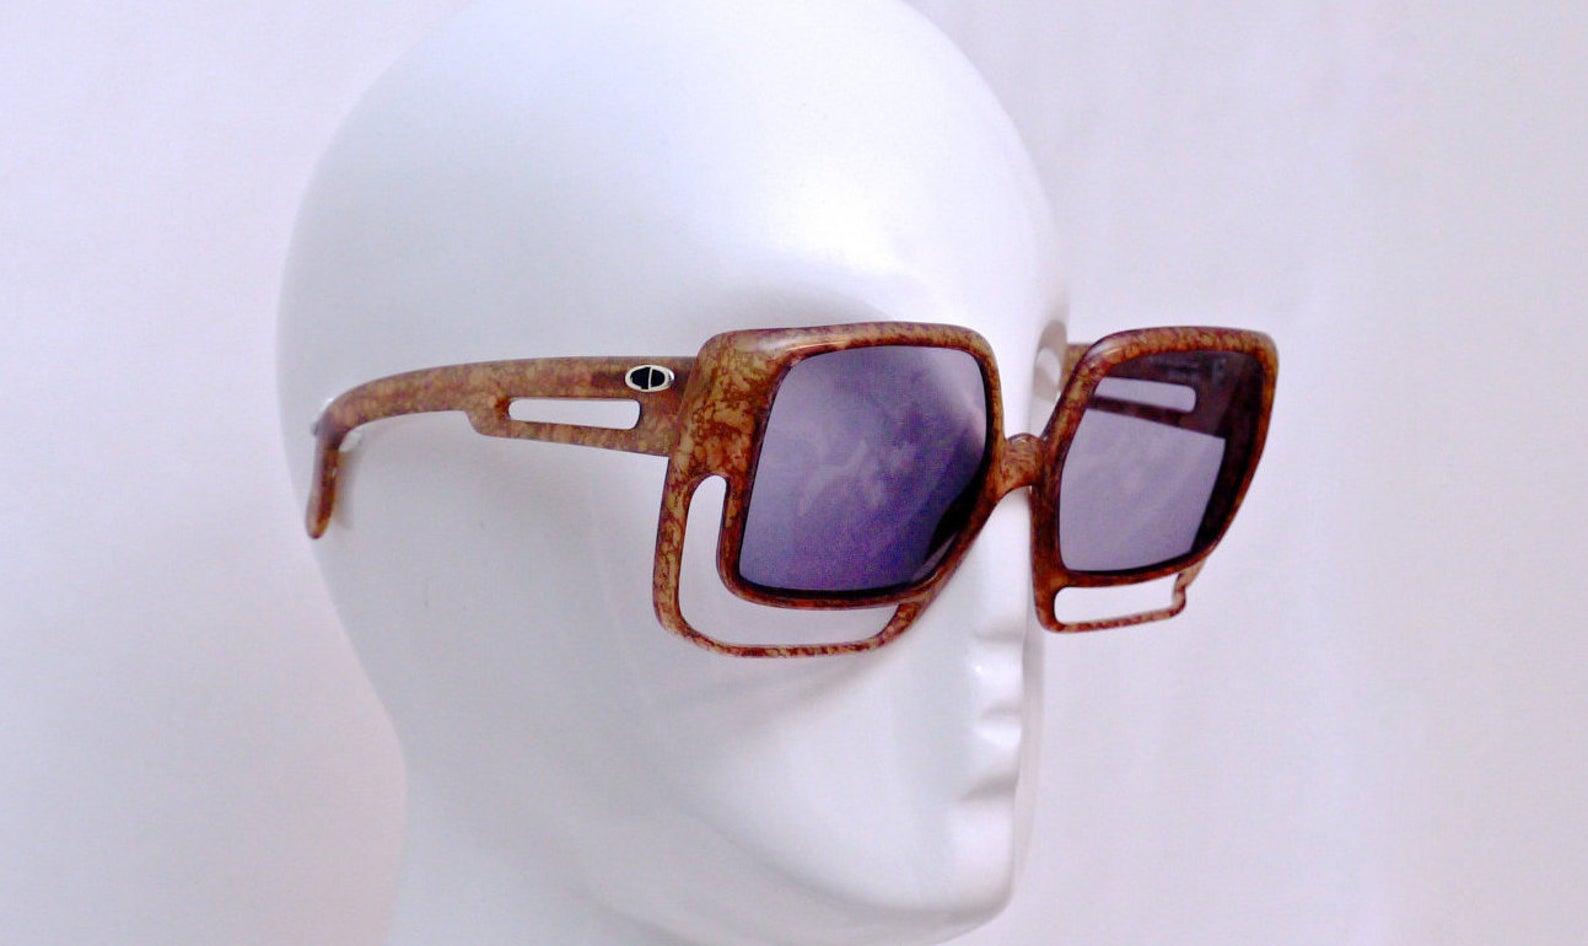 Vintage Oversize Christian Dior Space Age Brown Sunglasses

Measurements:
Height: 2 5/8 inches
Horizontal Width: 6 inches
Temples: 5 inches

Features:
- 100% Authentic Vintage CHRISTIAN DIOR.
- Oversized space age sunglasses.
- Marbled brown colour